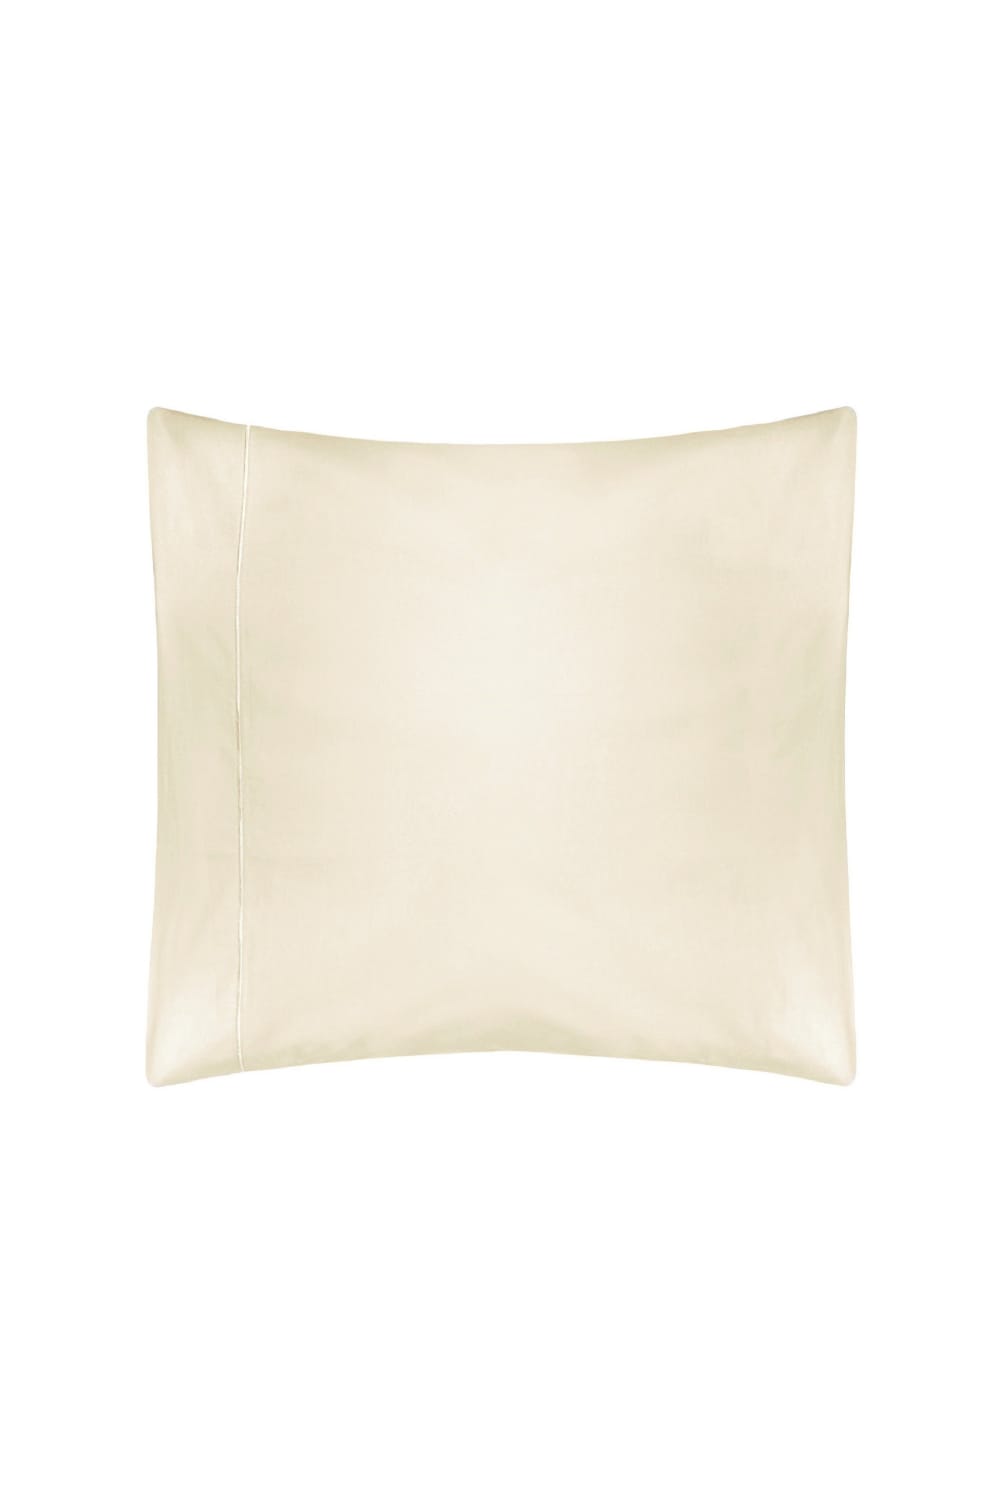 Belledorm 400 Thread Count Egyptian Cotton Continental Pillowcase (Ivory) (One Size)